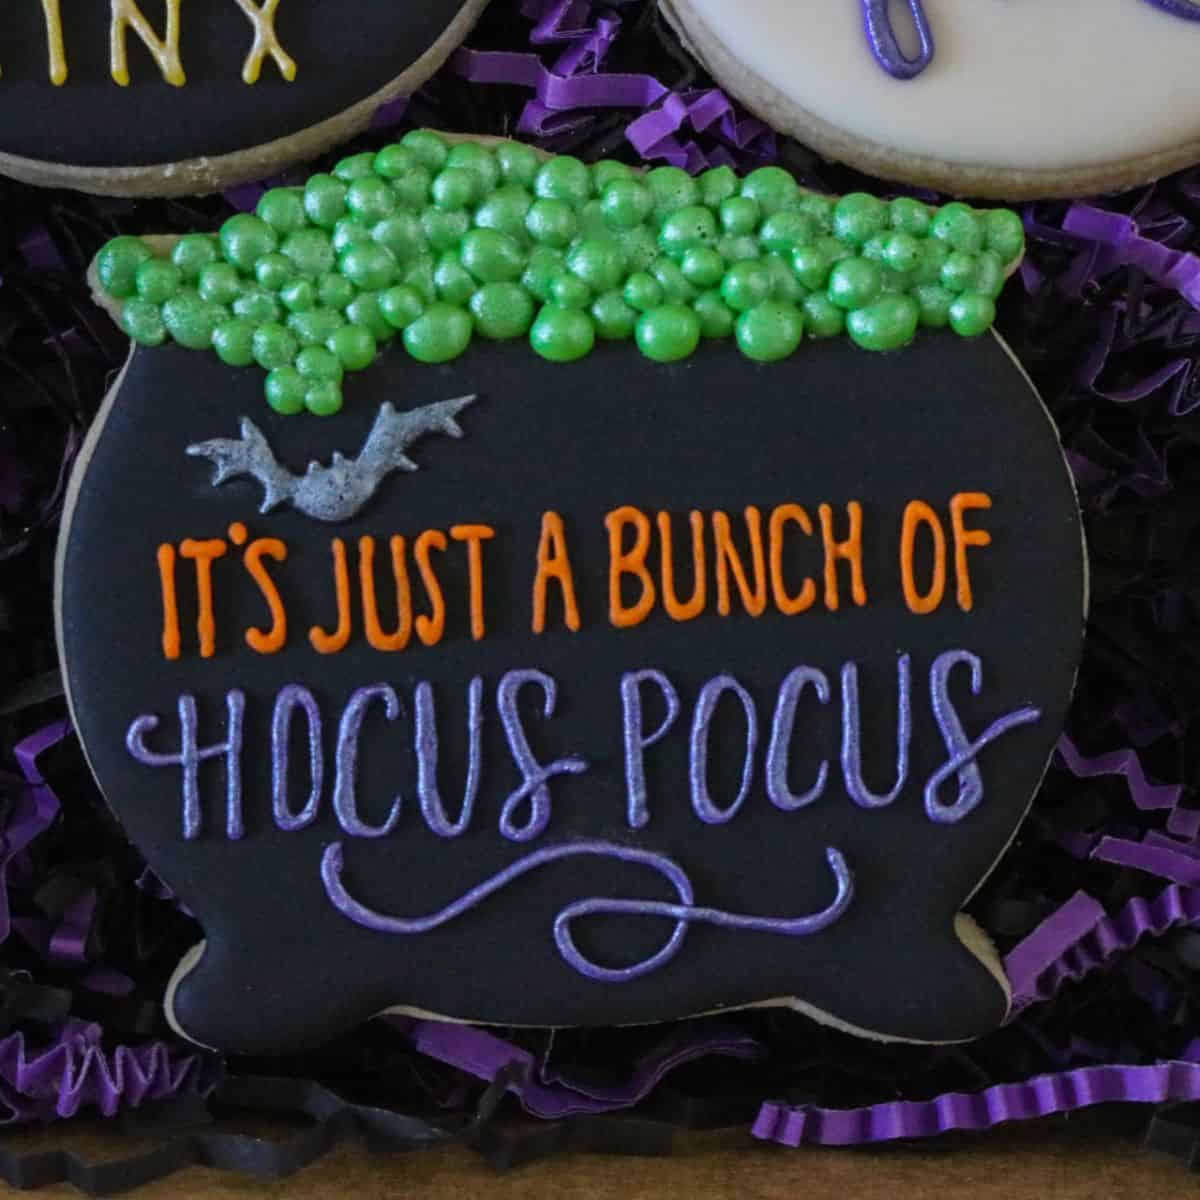 Cookie with hocus pocus written on a cauldron.